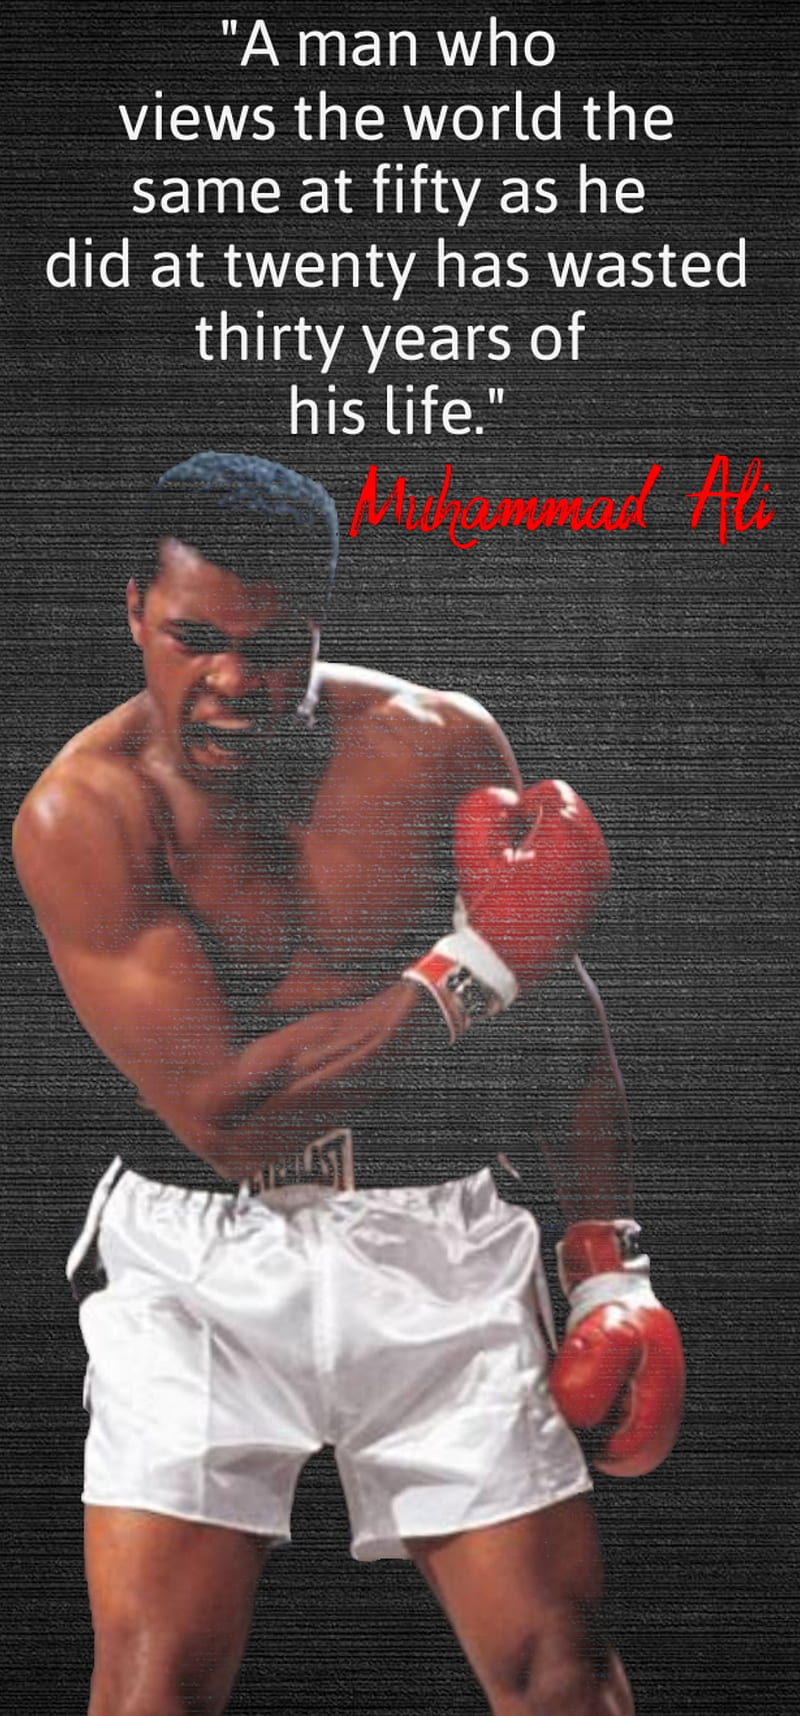 muhammad ali wallpaper impossible is nothing